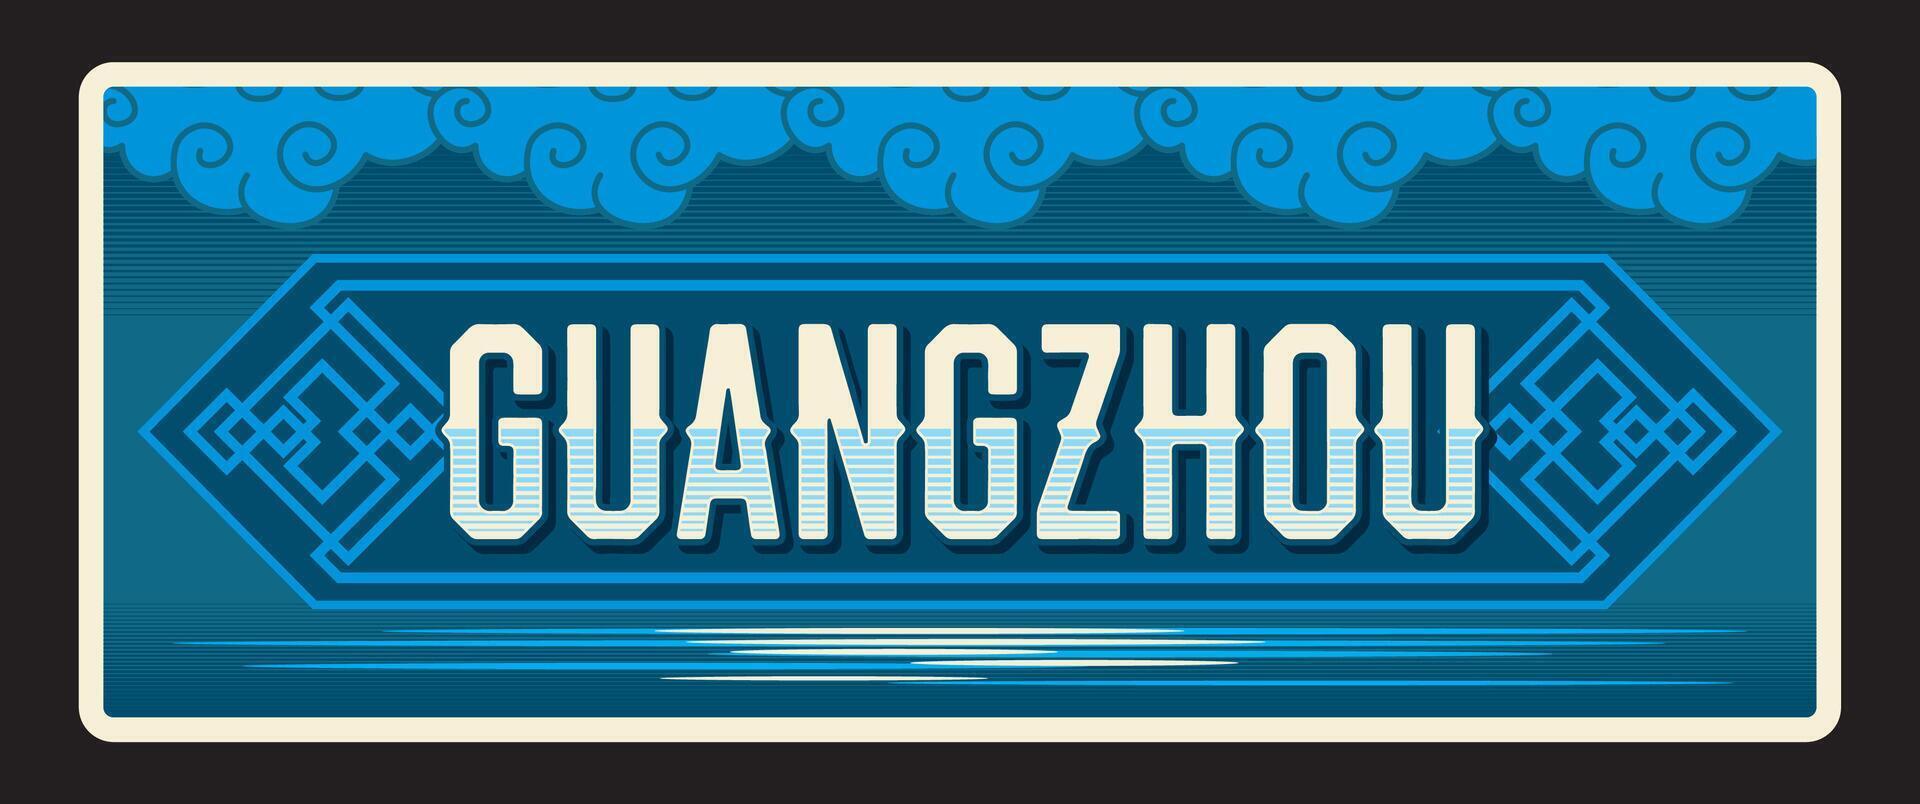 Guangzhou Chinese city travel plate vector